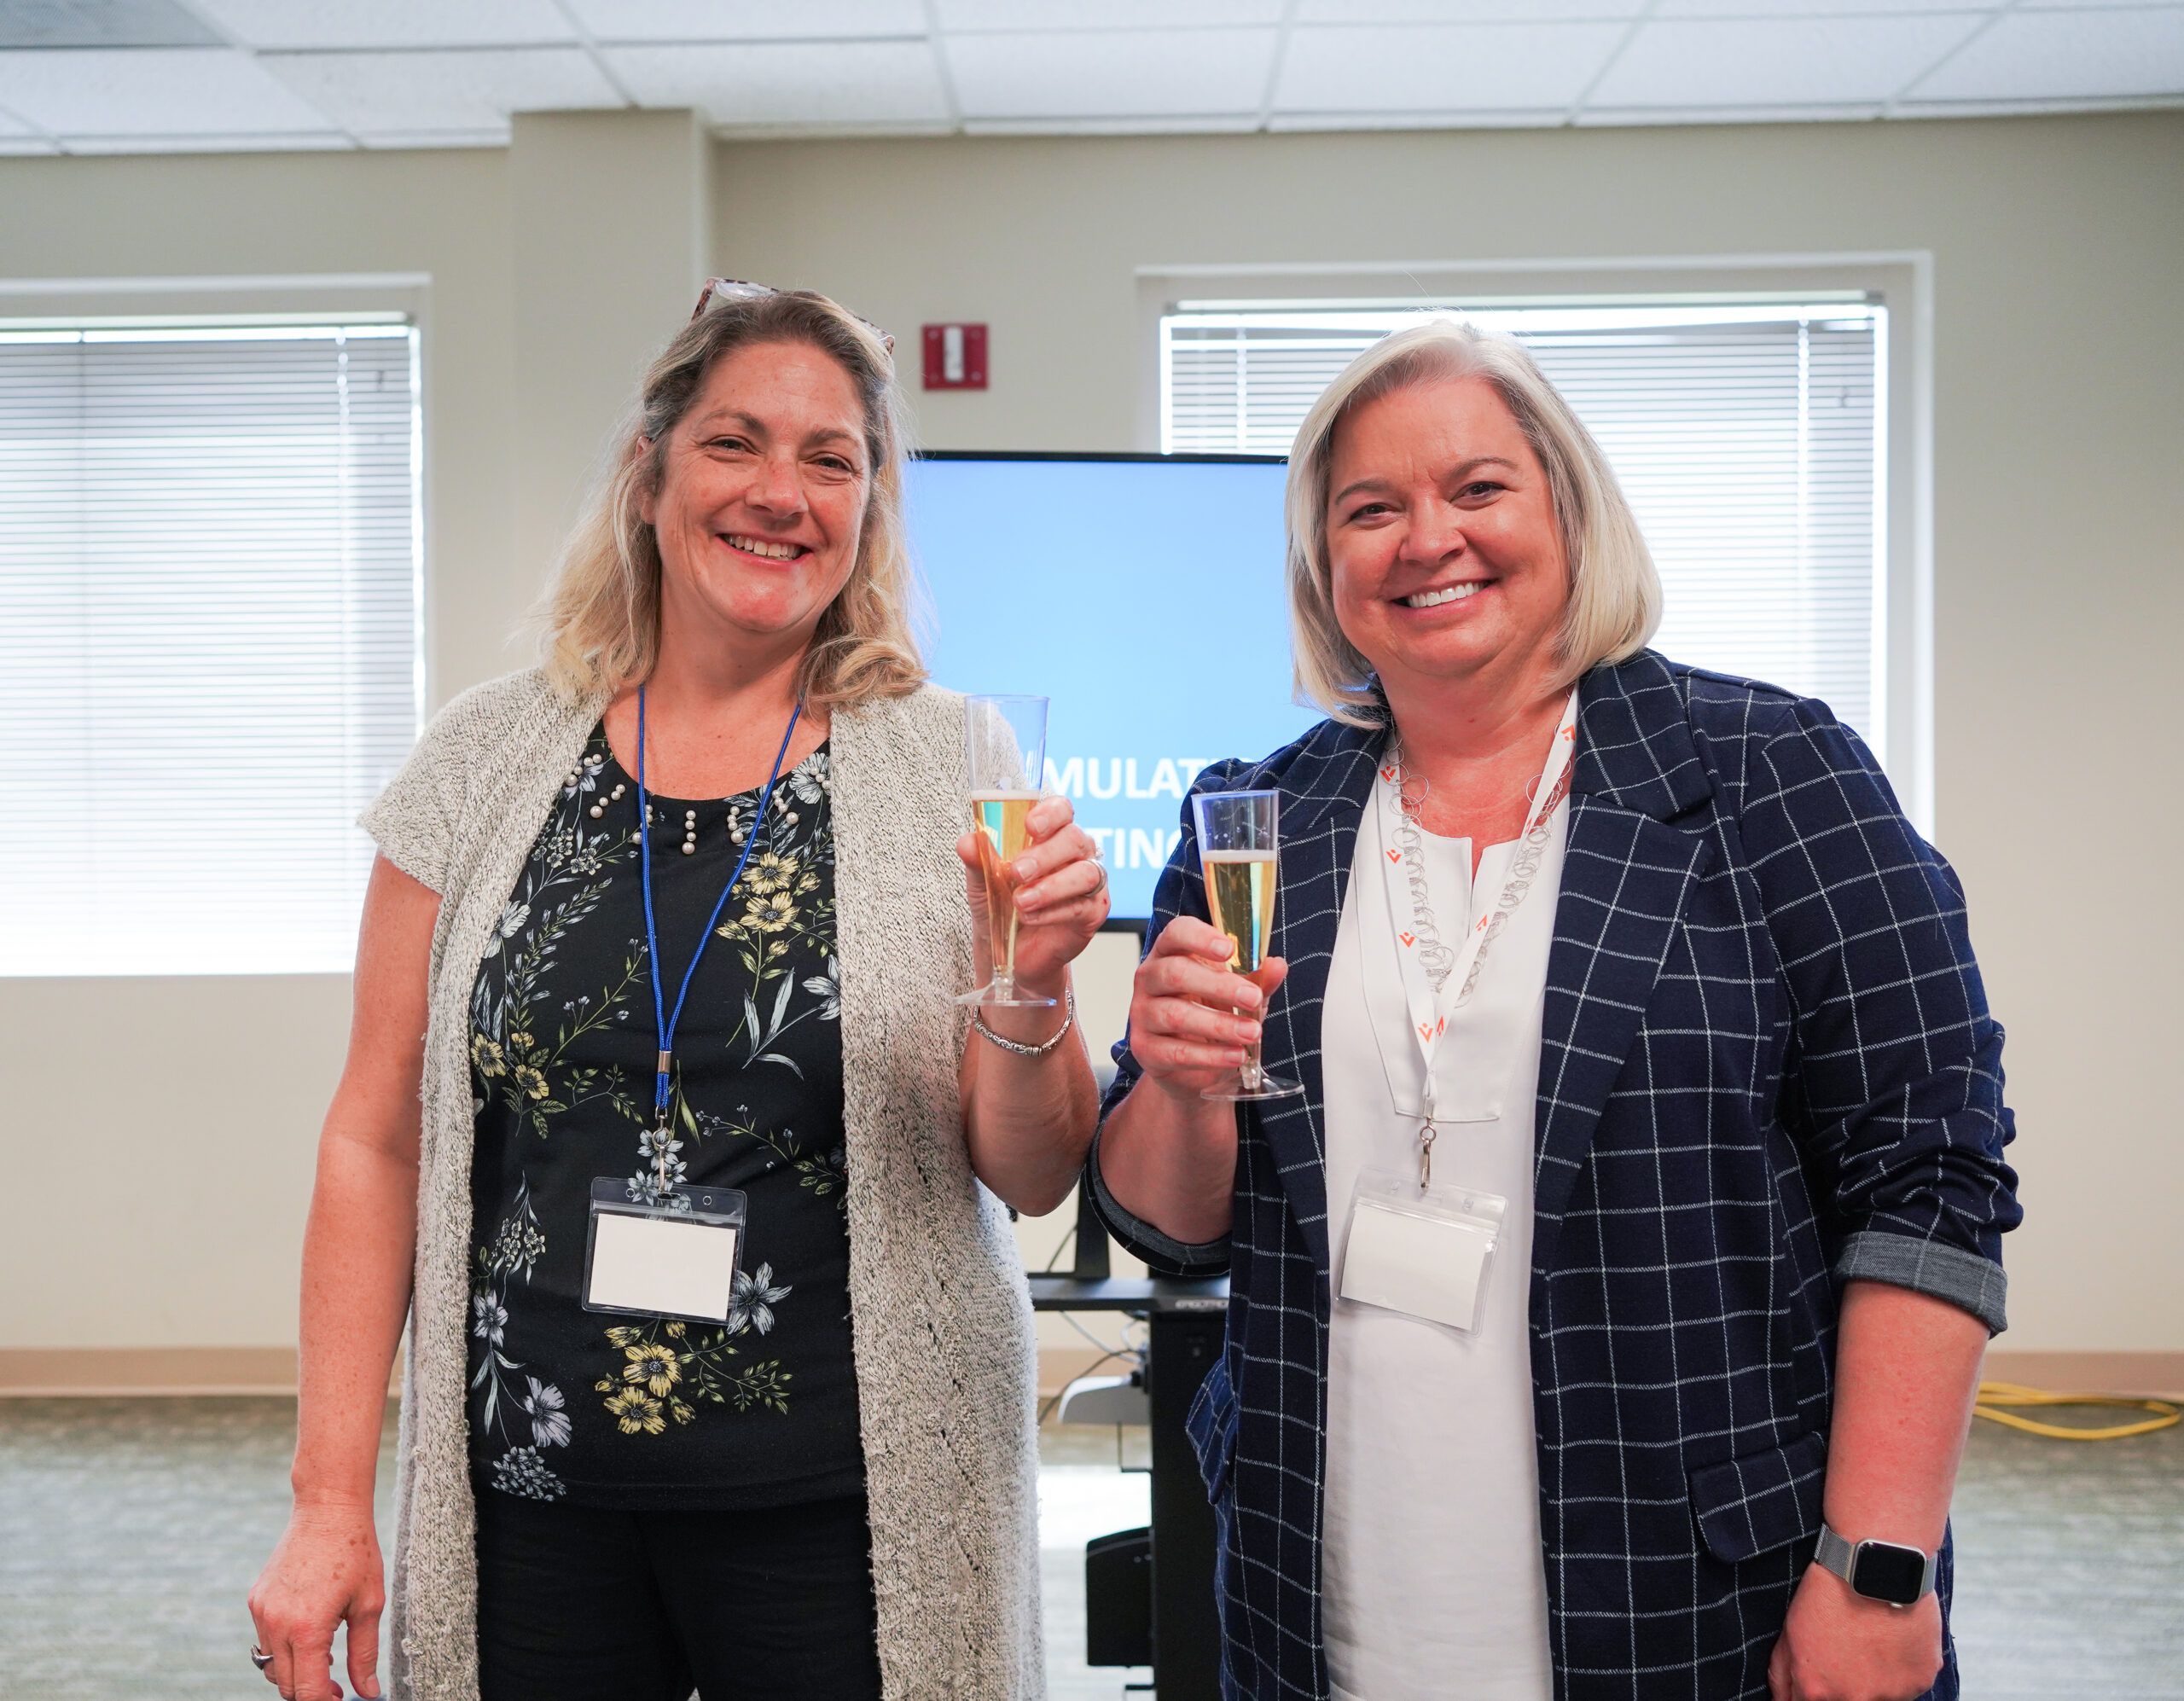 Avkin CEO, Amy Cowperthwait and Crystel Farina,Director of Simulation and Experiential Learning at GWU toast apple cider at SIM Summit George Washington University